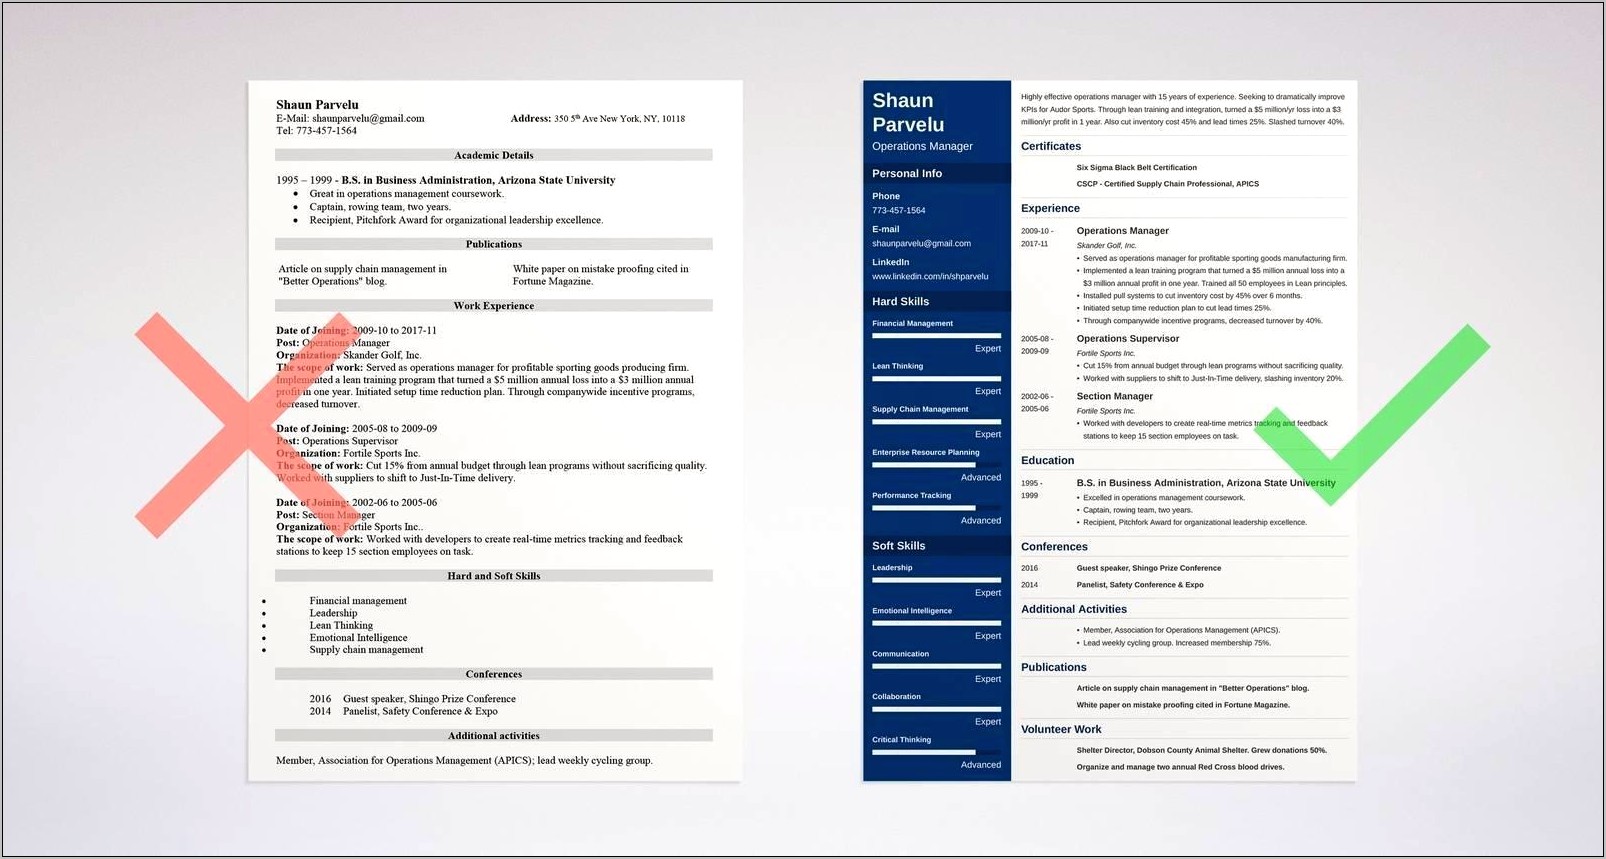 Profile Resume For Operation Manager Bank